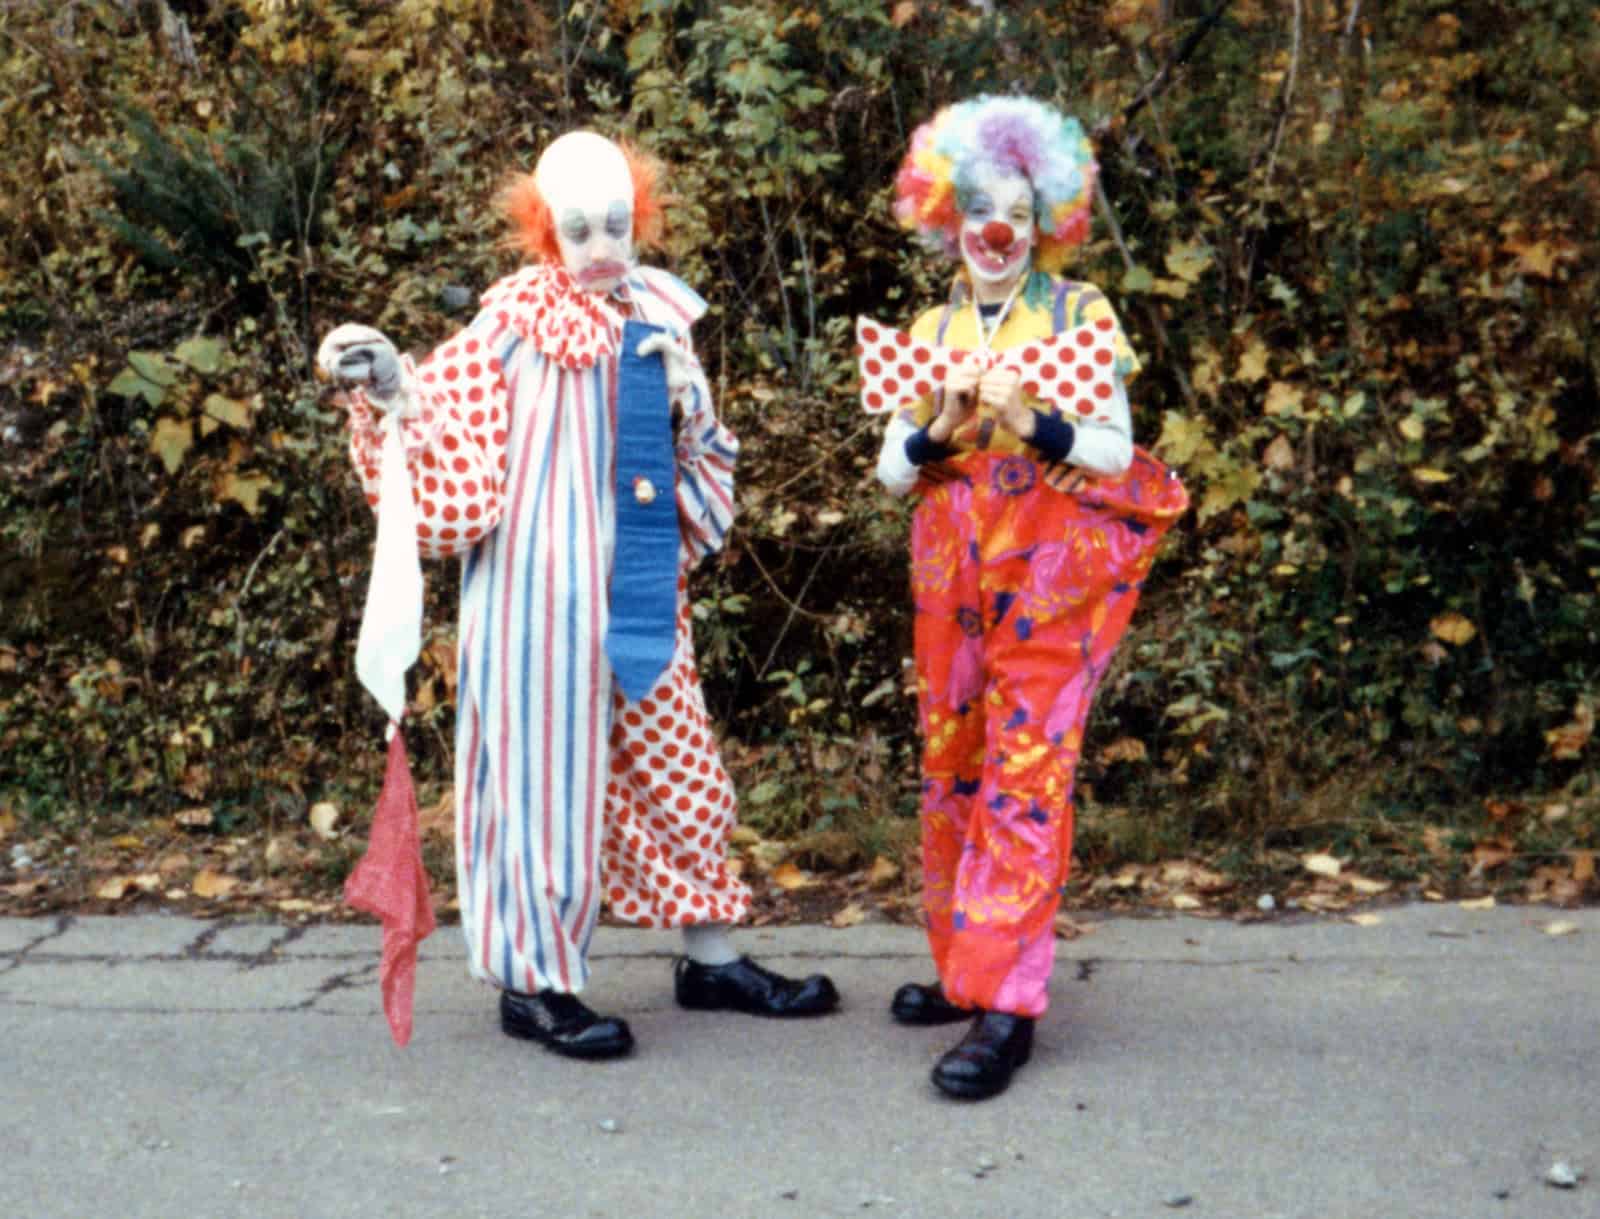 drew and jonathan scott dressed as clowns in childhood